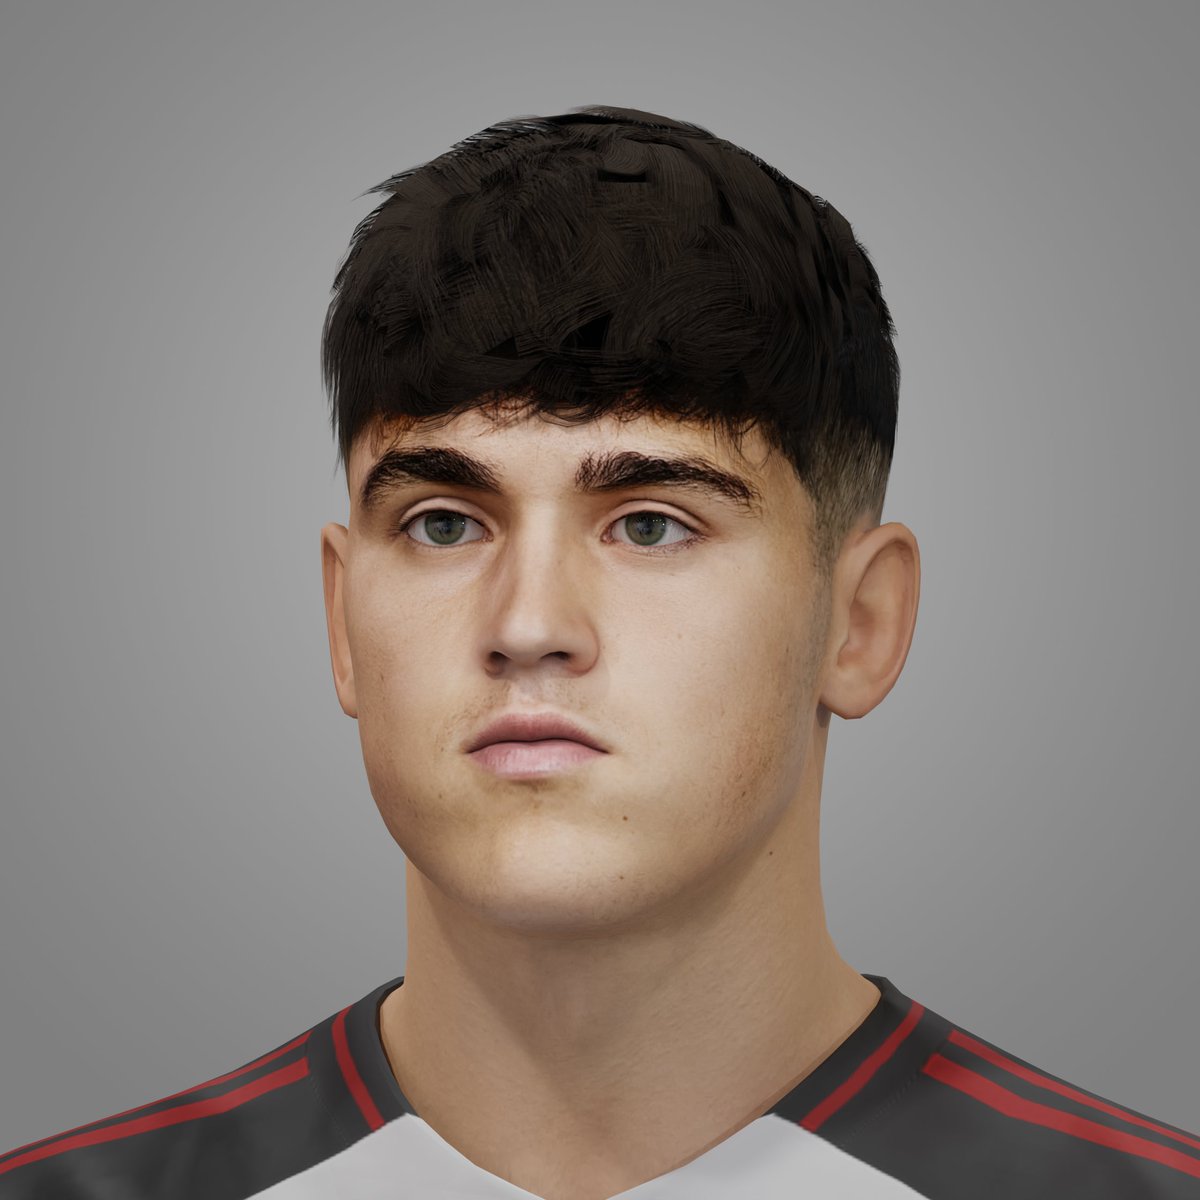 Pau Cubarsi | RENDER PREVIEW

📇 Contact me for personal face or request!

#nerwin64 #fifa23 #fc24 #fifafaces #fifaMods #nextgen